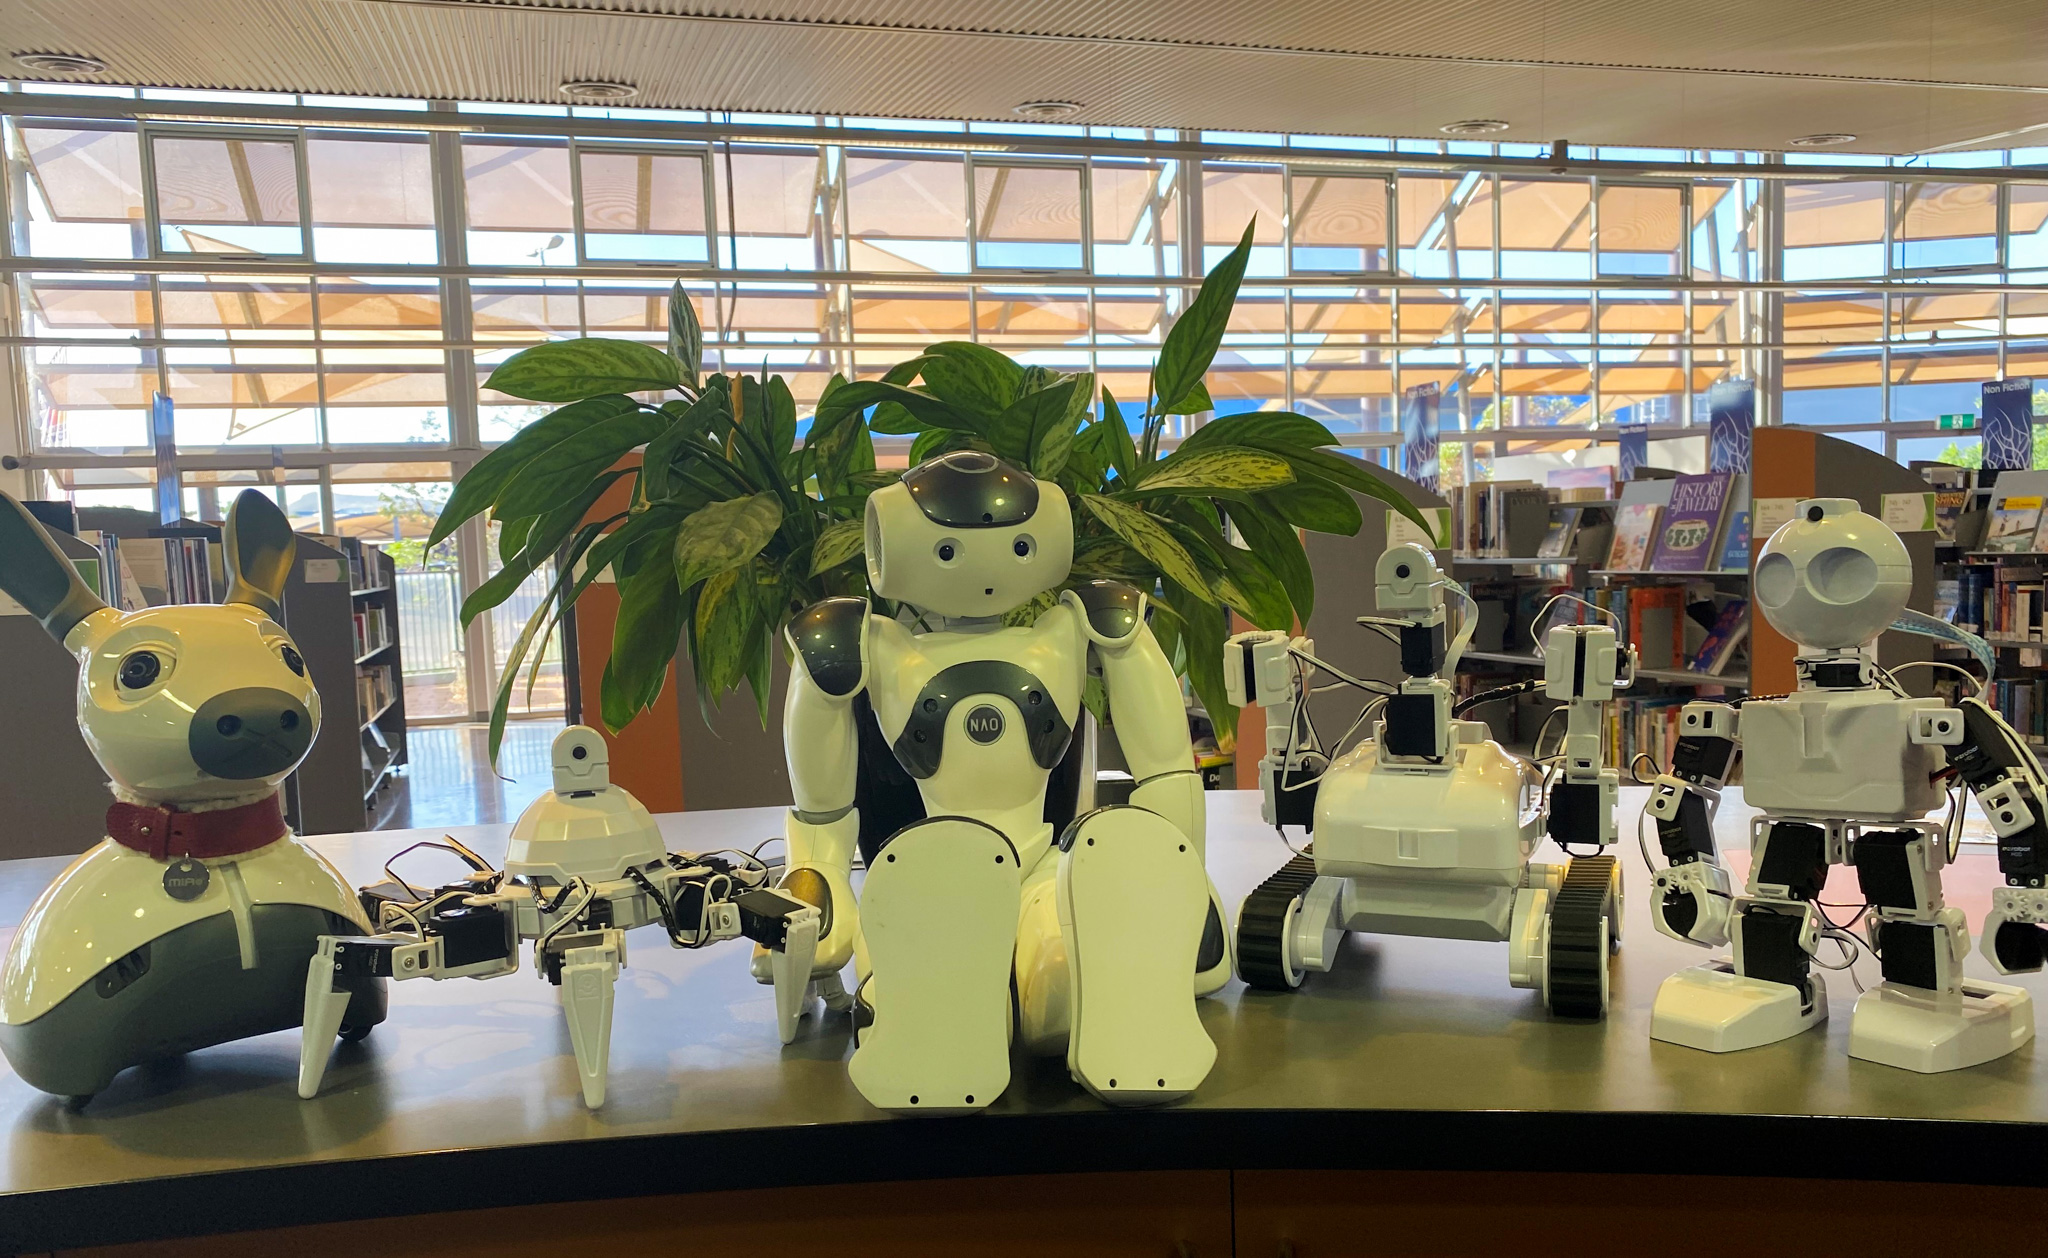 Library robots lined up on the counter